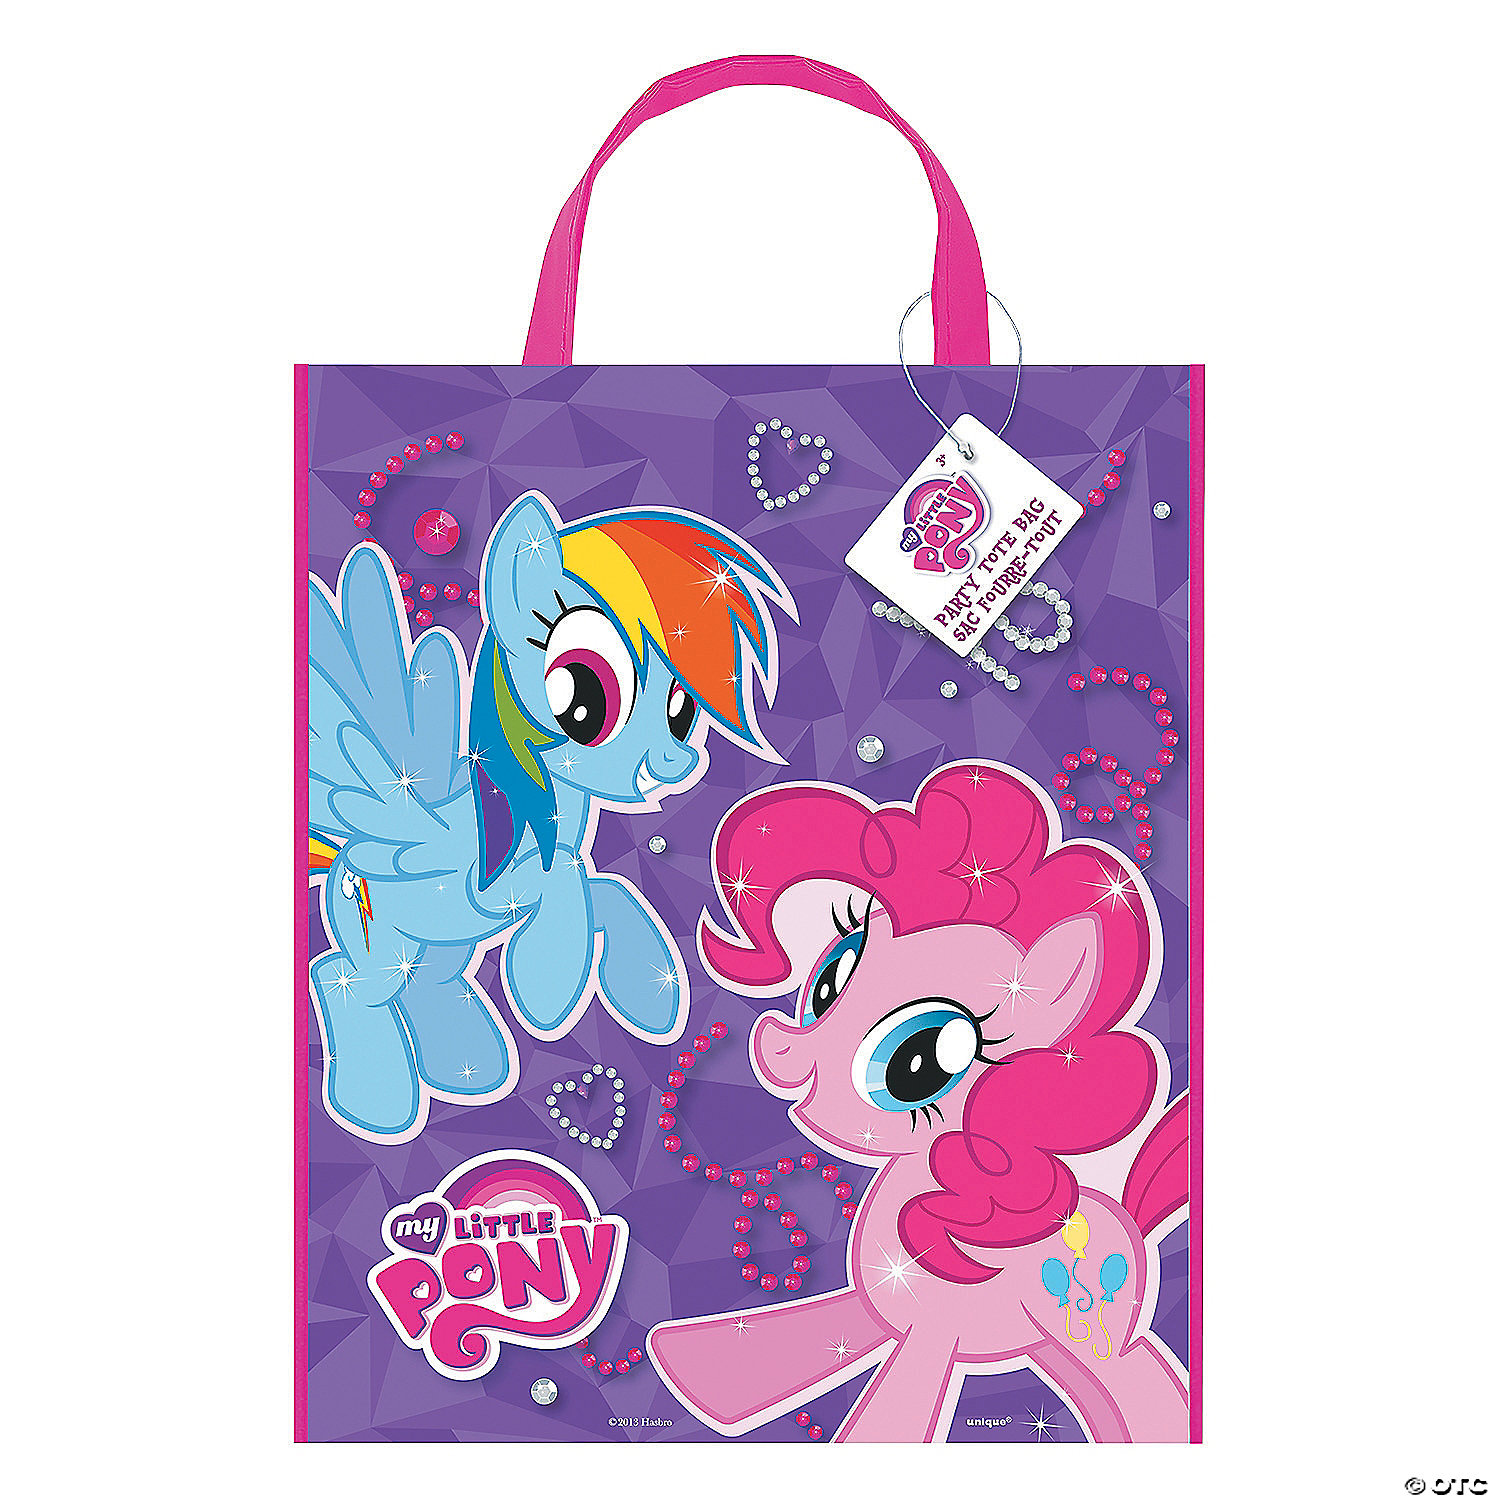 MY LITTLE PONY Temporary Tattoos Birthday Party Pack Loot Bag Fillers 